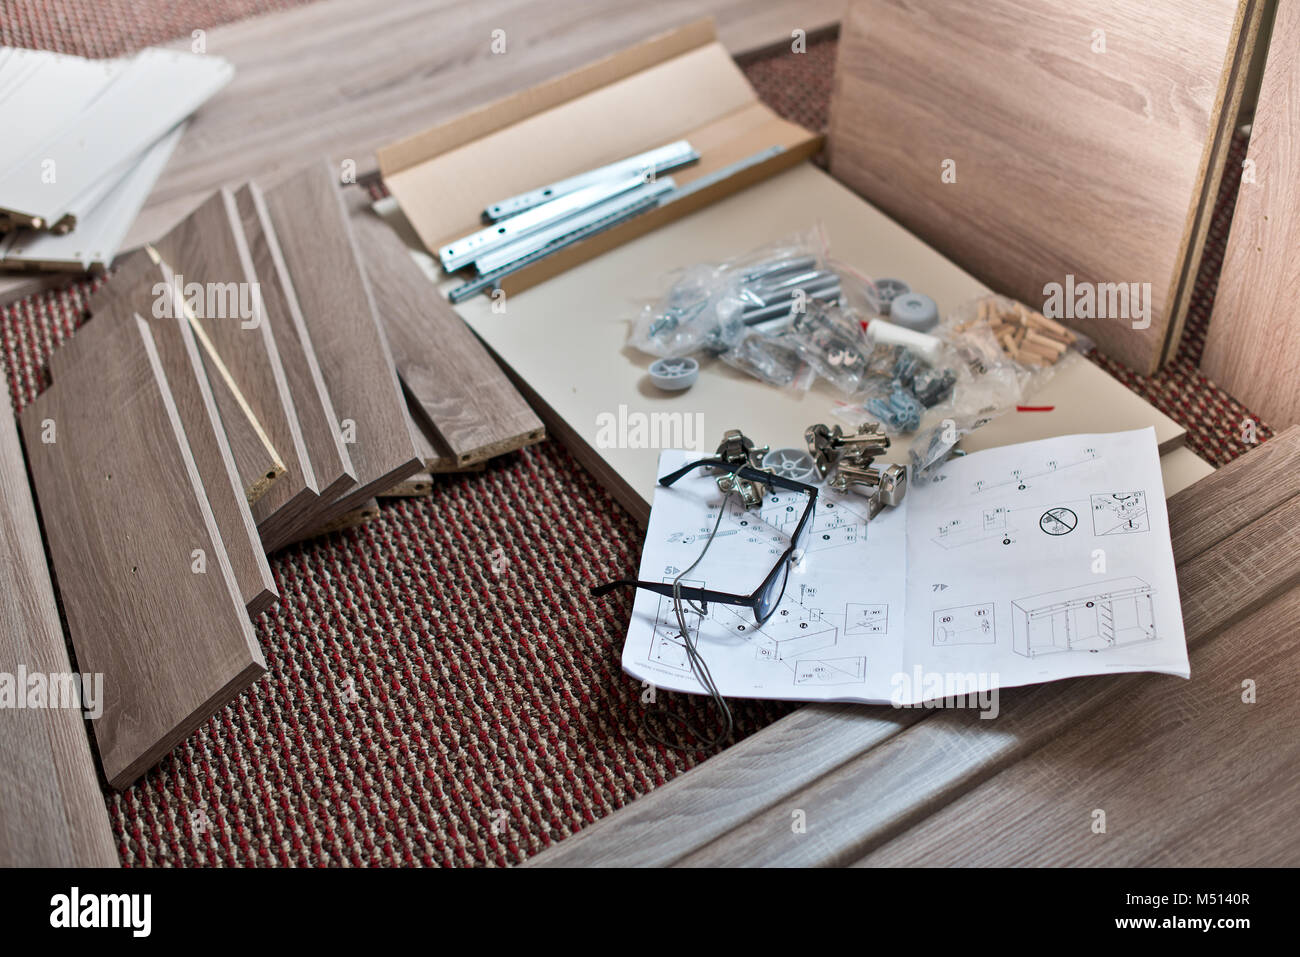 Preparation for New Furniture Installation on the Carpet. Stock Photo